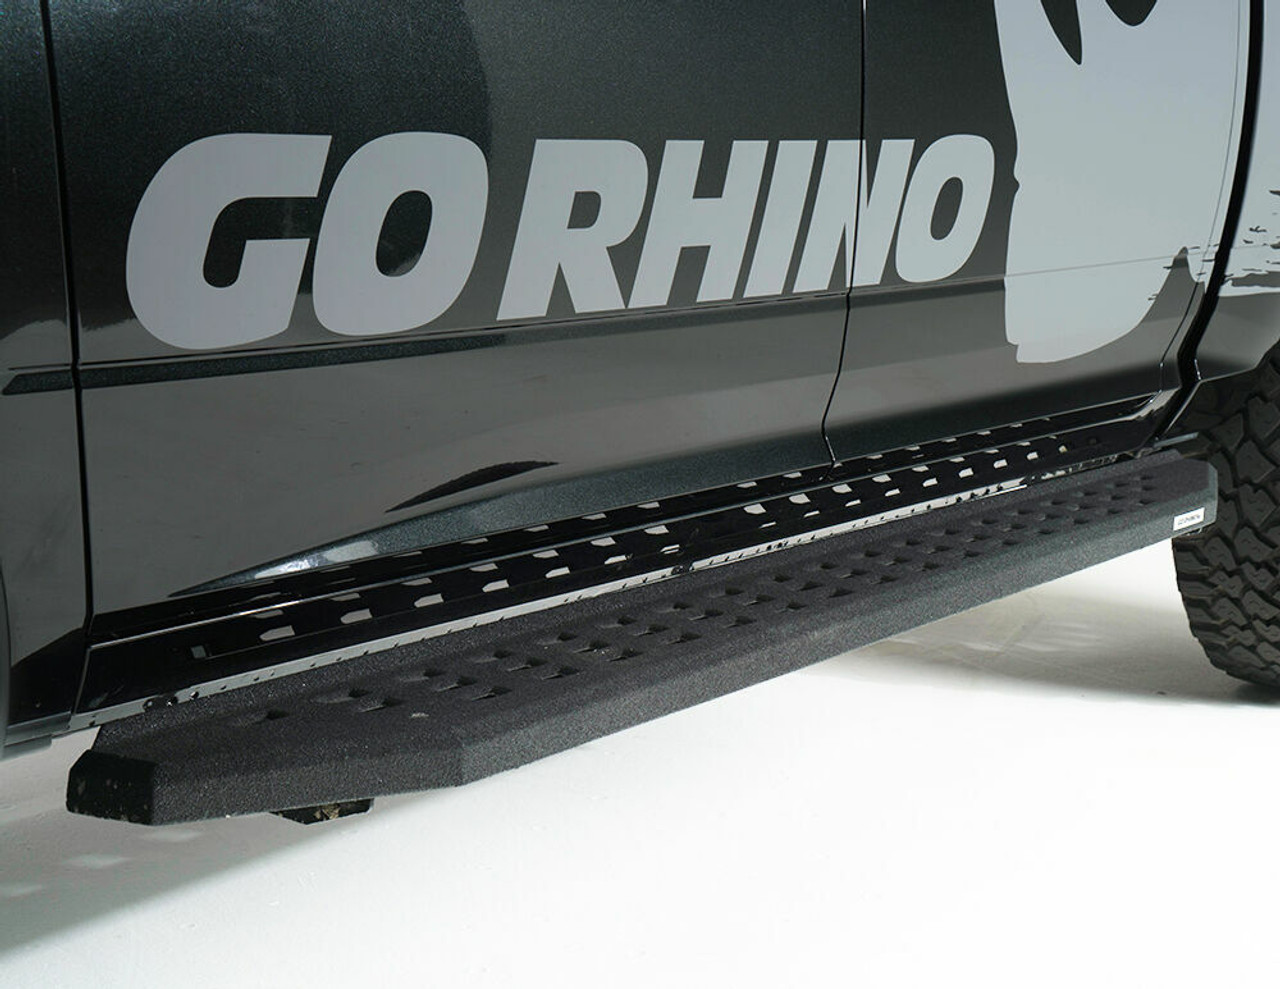 Go Rhino 69404787T Chevrolet, Silverado 1500 LD (Classic), 2014 - 2019, RB20 Running boards - Complete Kit: RB20 Running boards + Brackets, Galvanized Steel, Protective Bedliner coating, 69400087T RB20 + 6940475 RB Brackets, Classic Body Style Only